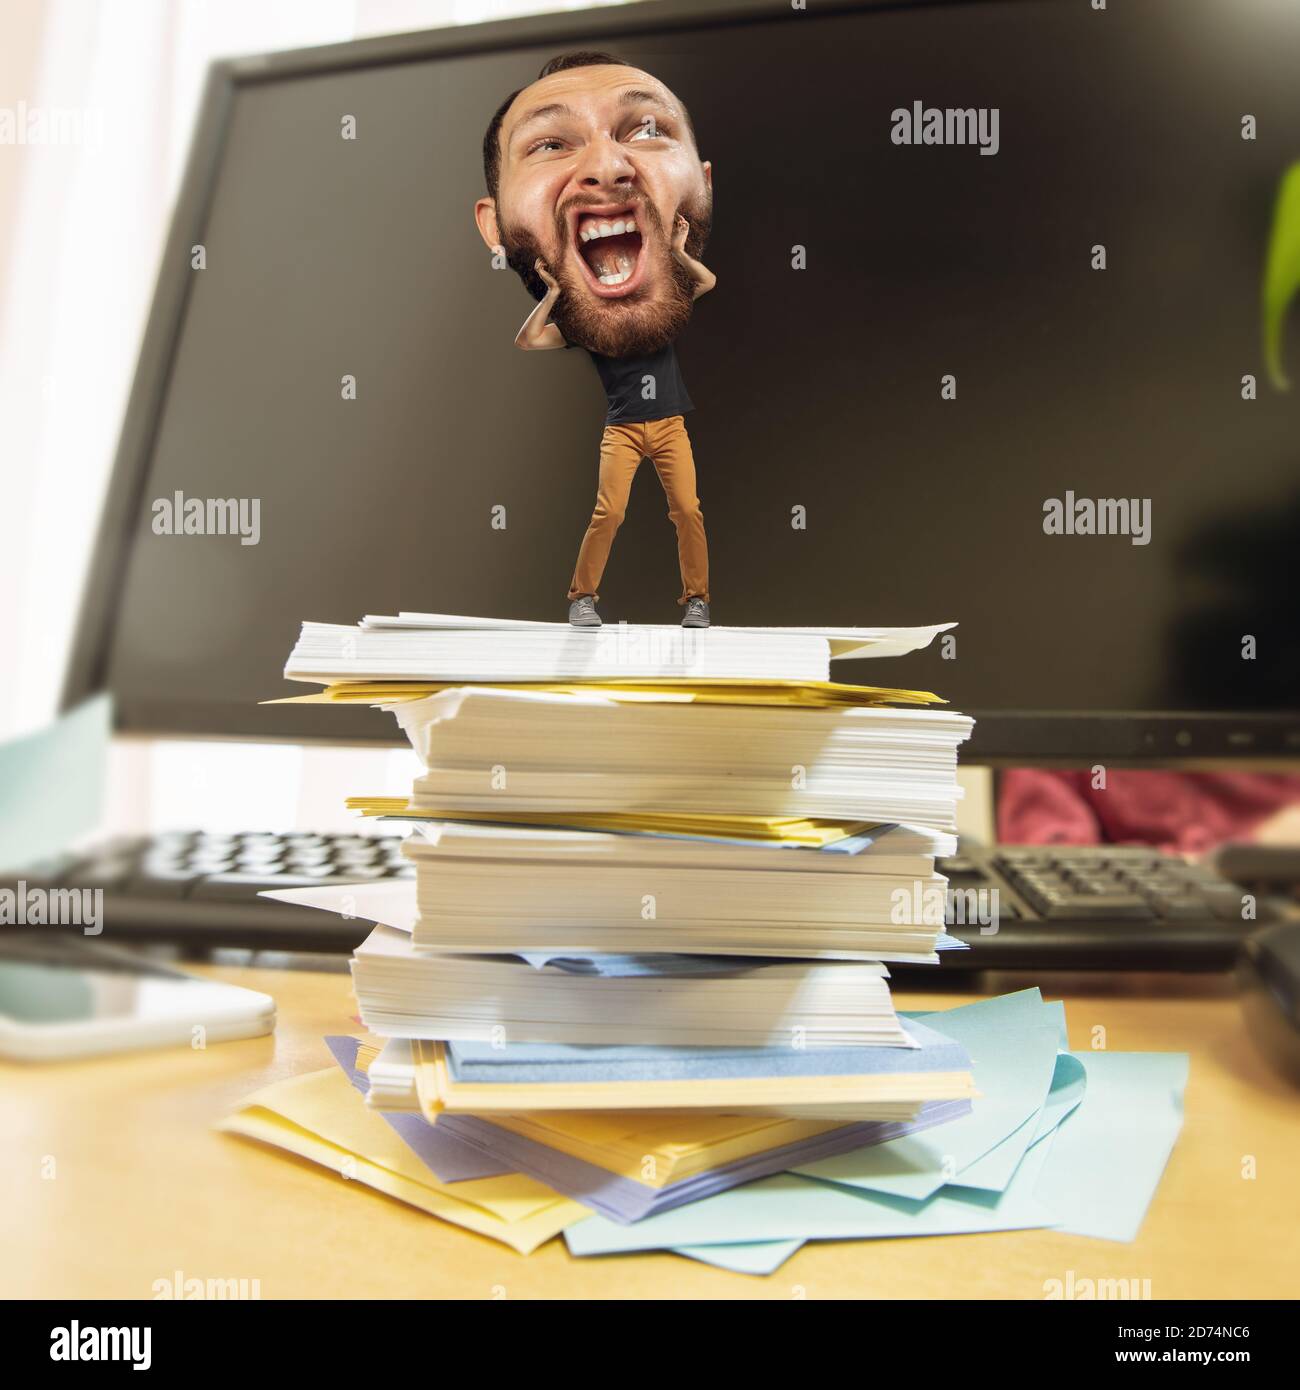 Screaming. Tired man, office worker holding his huge tired head, funny. Overworked caucasian man with little body and huge head looks stressed, shocked at big workplace. Concept of work, job, deadline. Stock Photo